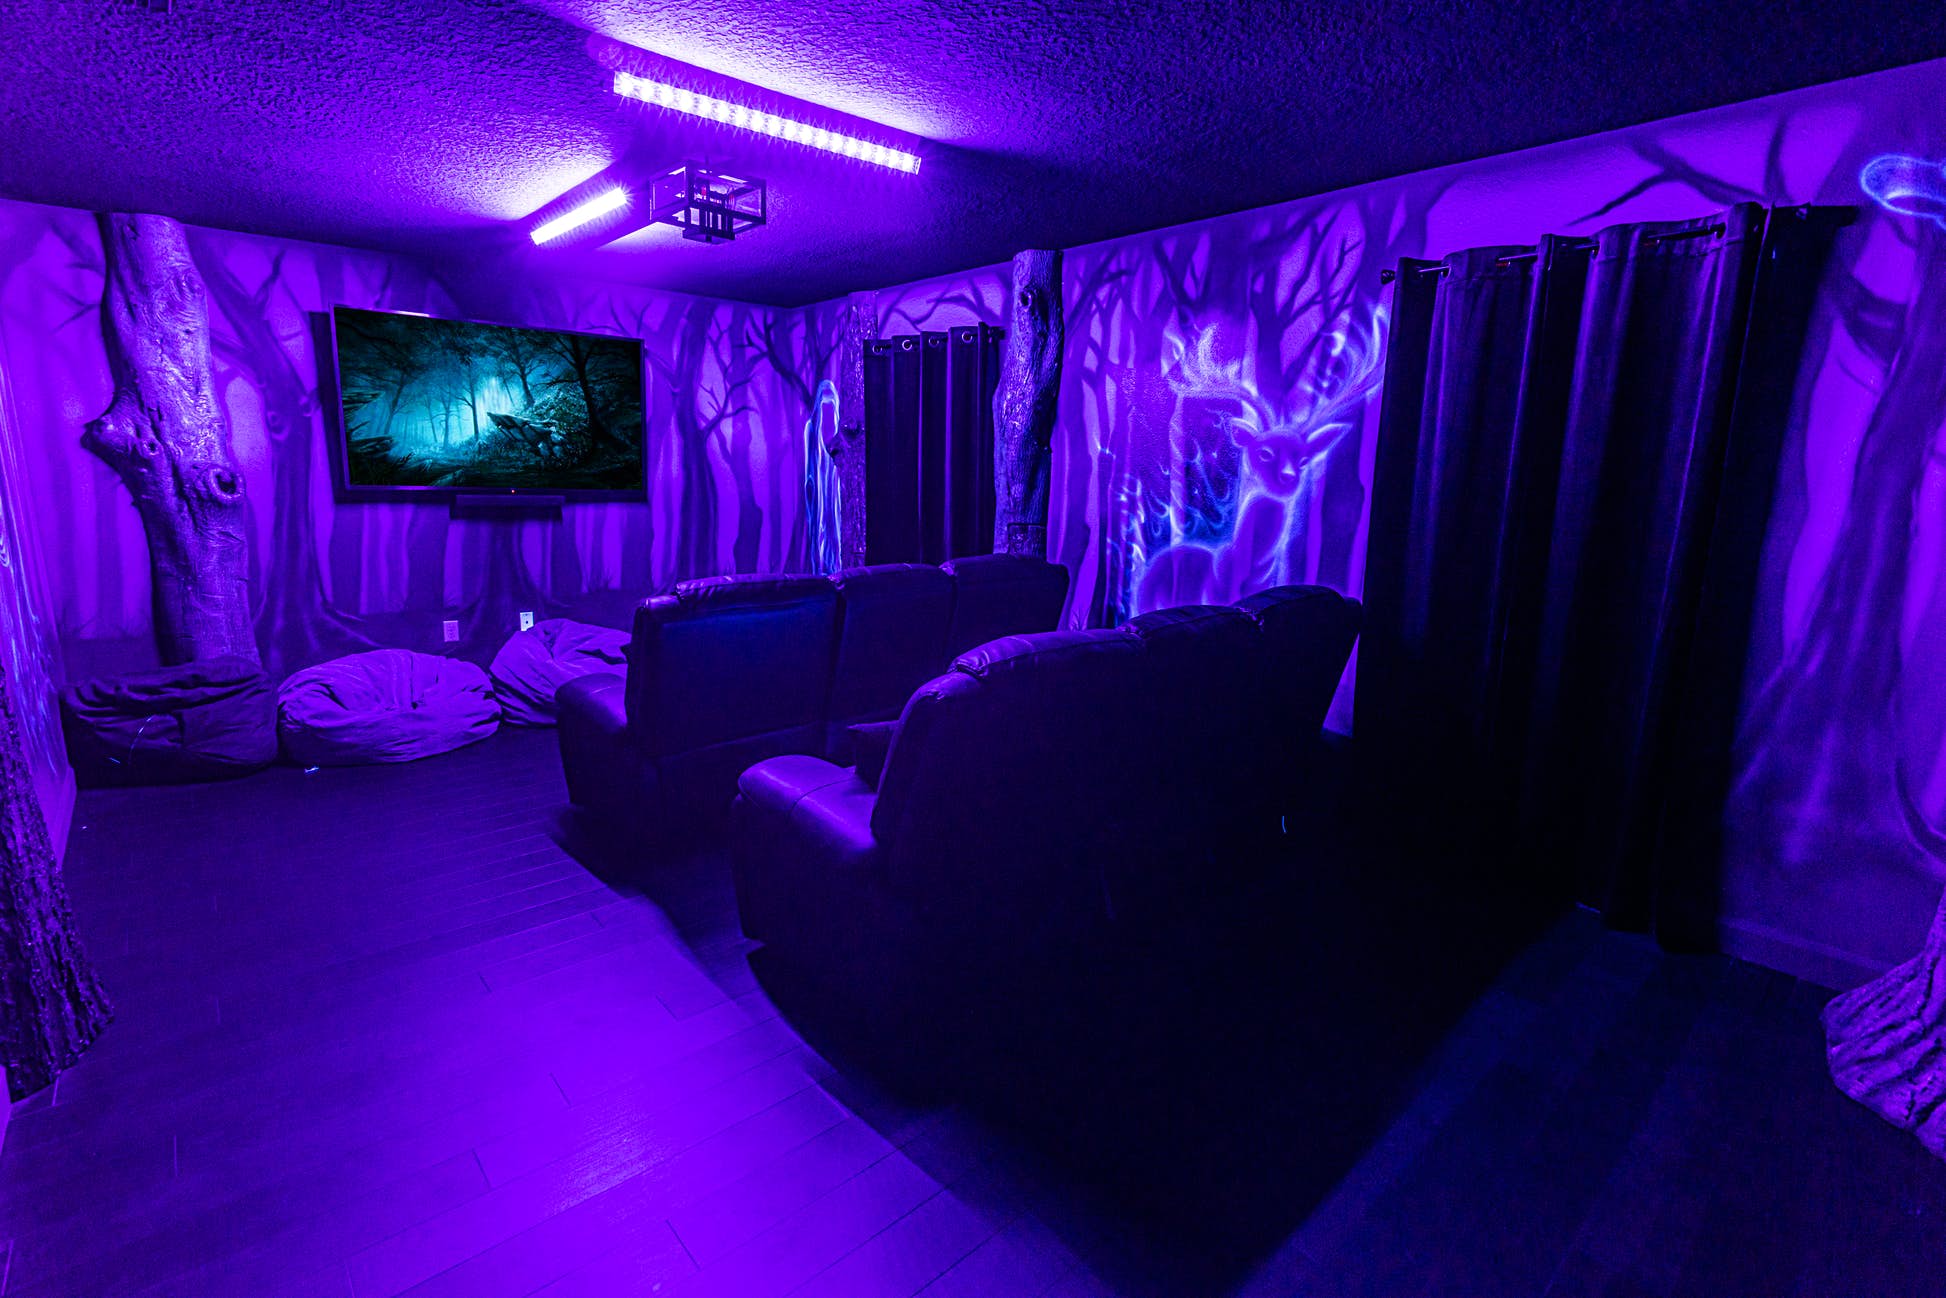 The theatre room comes complete with haunting dementors © Loma Homes